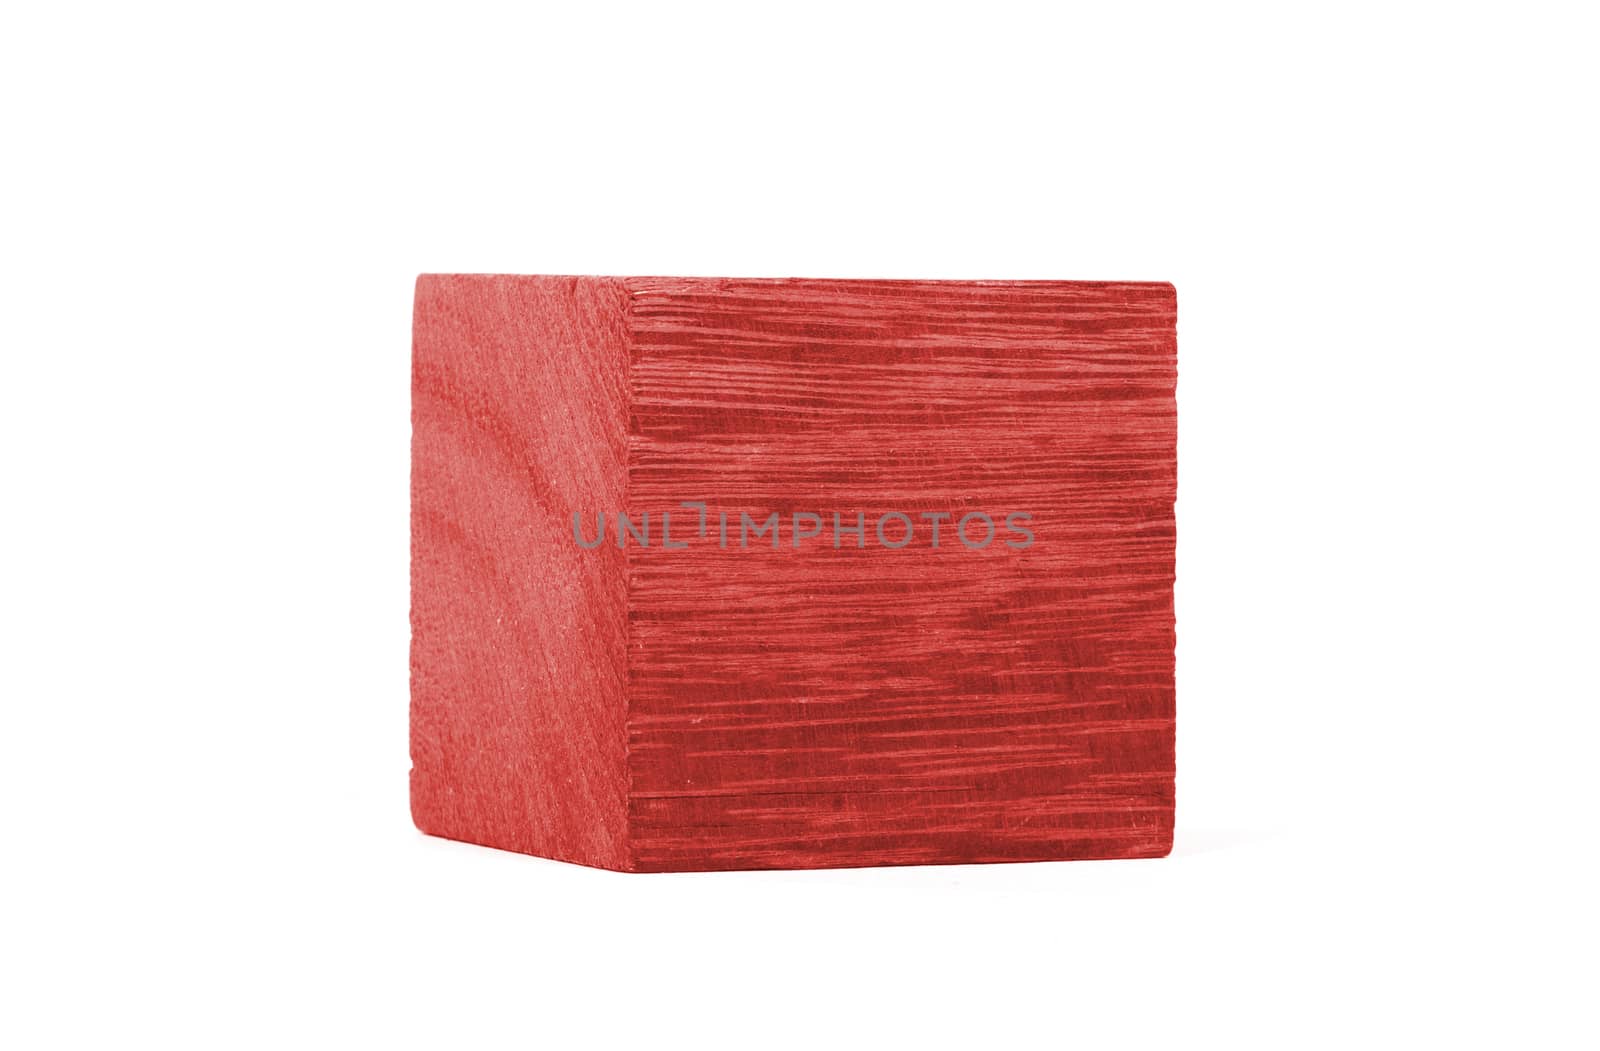 Vintage red building block isolated on white background